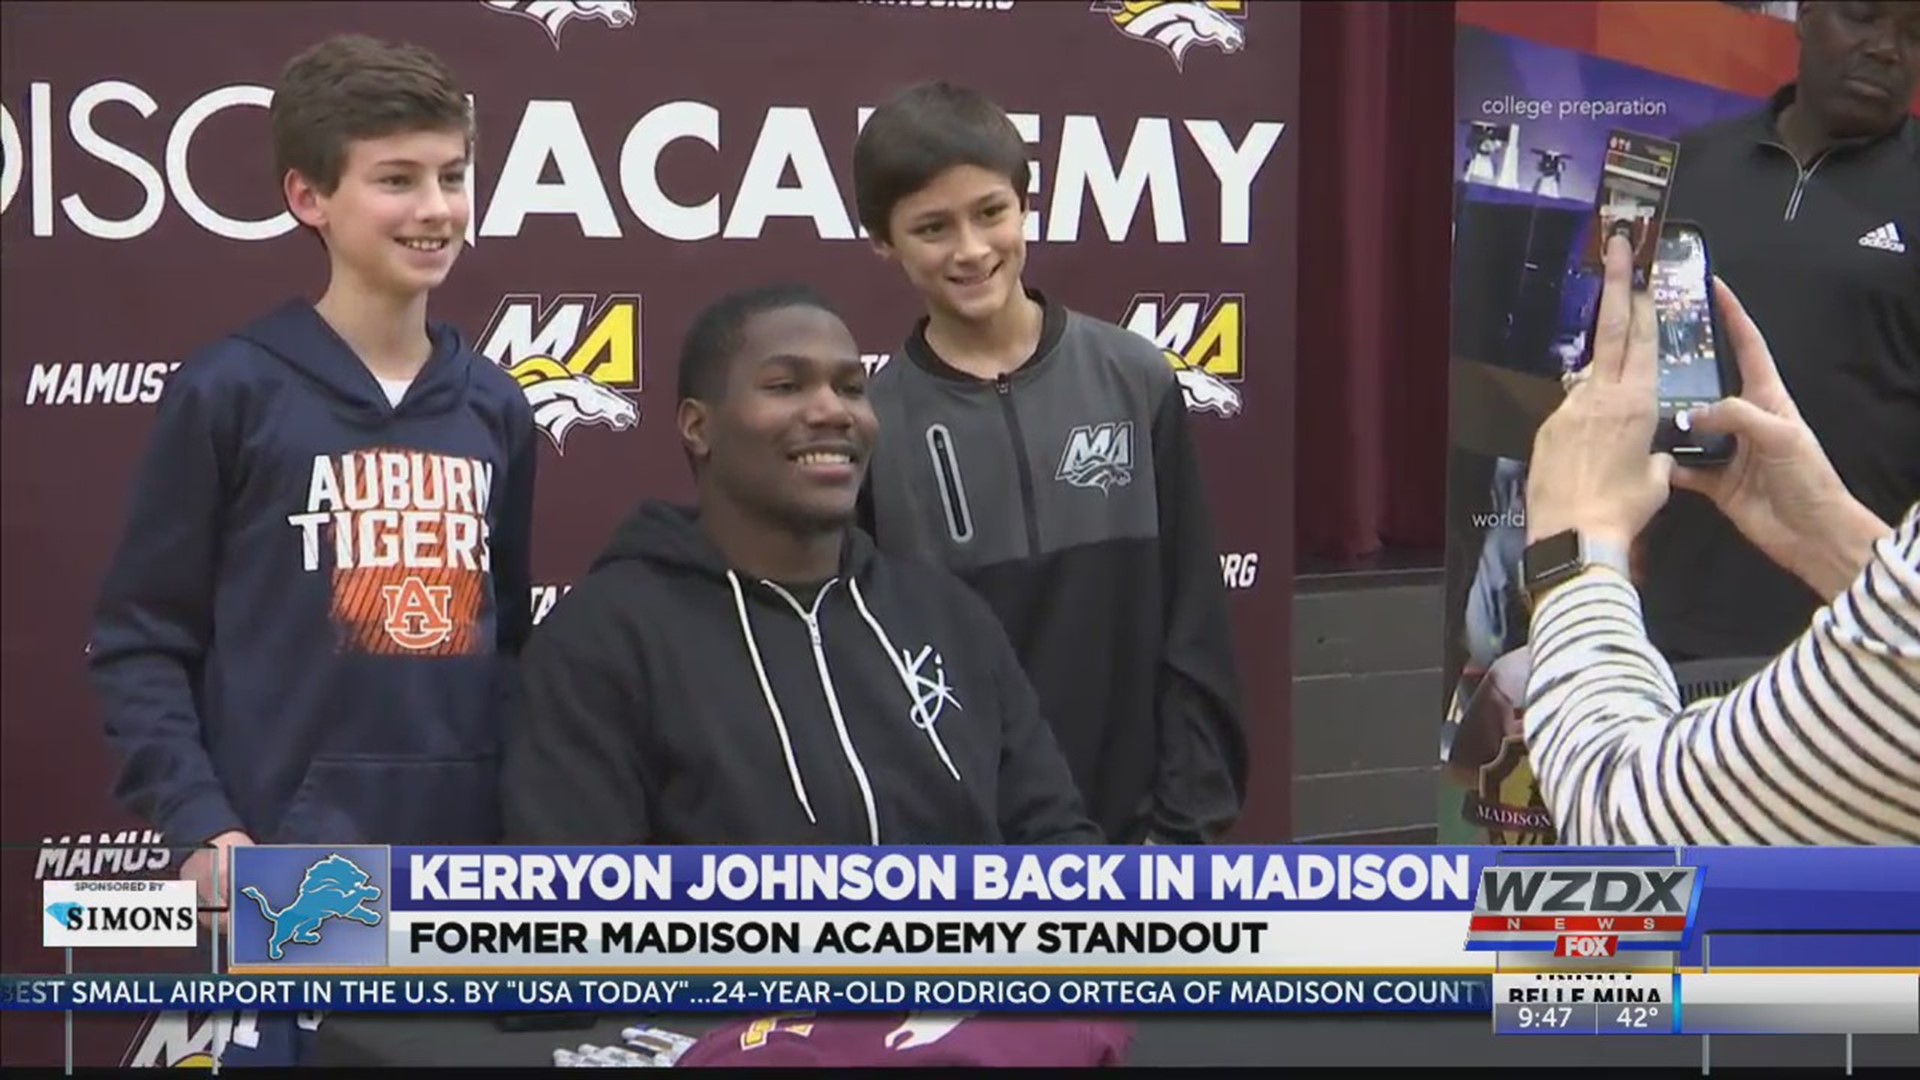 Former Madison Academy and Auburn standout, Kerryon Johnson, came back to sign autographs for fans Friday evening.